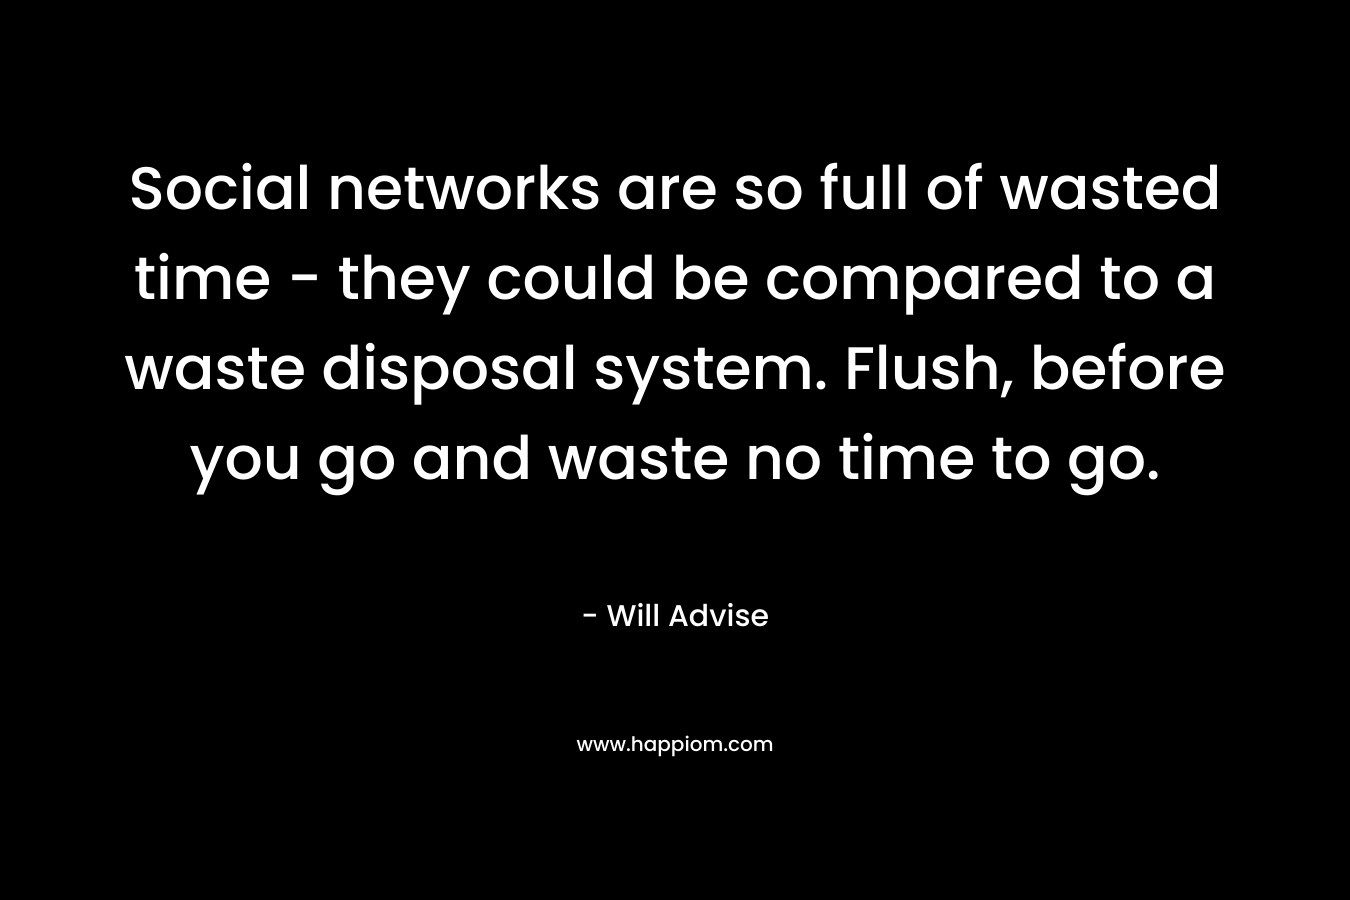 Social networks are so full of wasted time - they could be compared to a waste disposal system. Flush, before you go and waste no time to go.